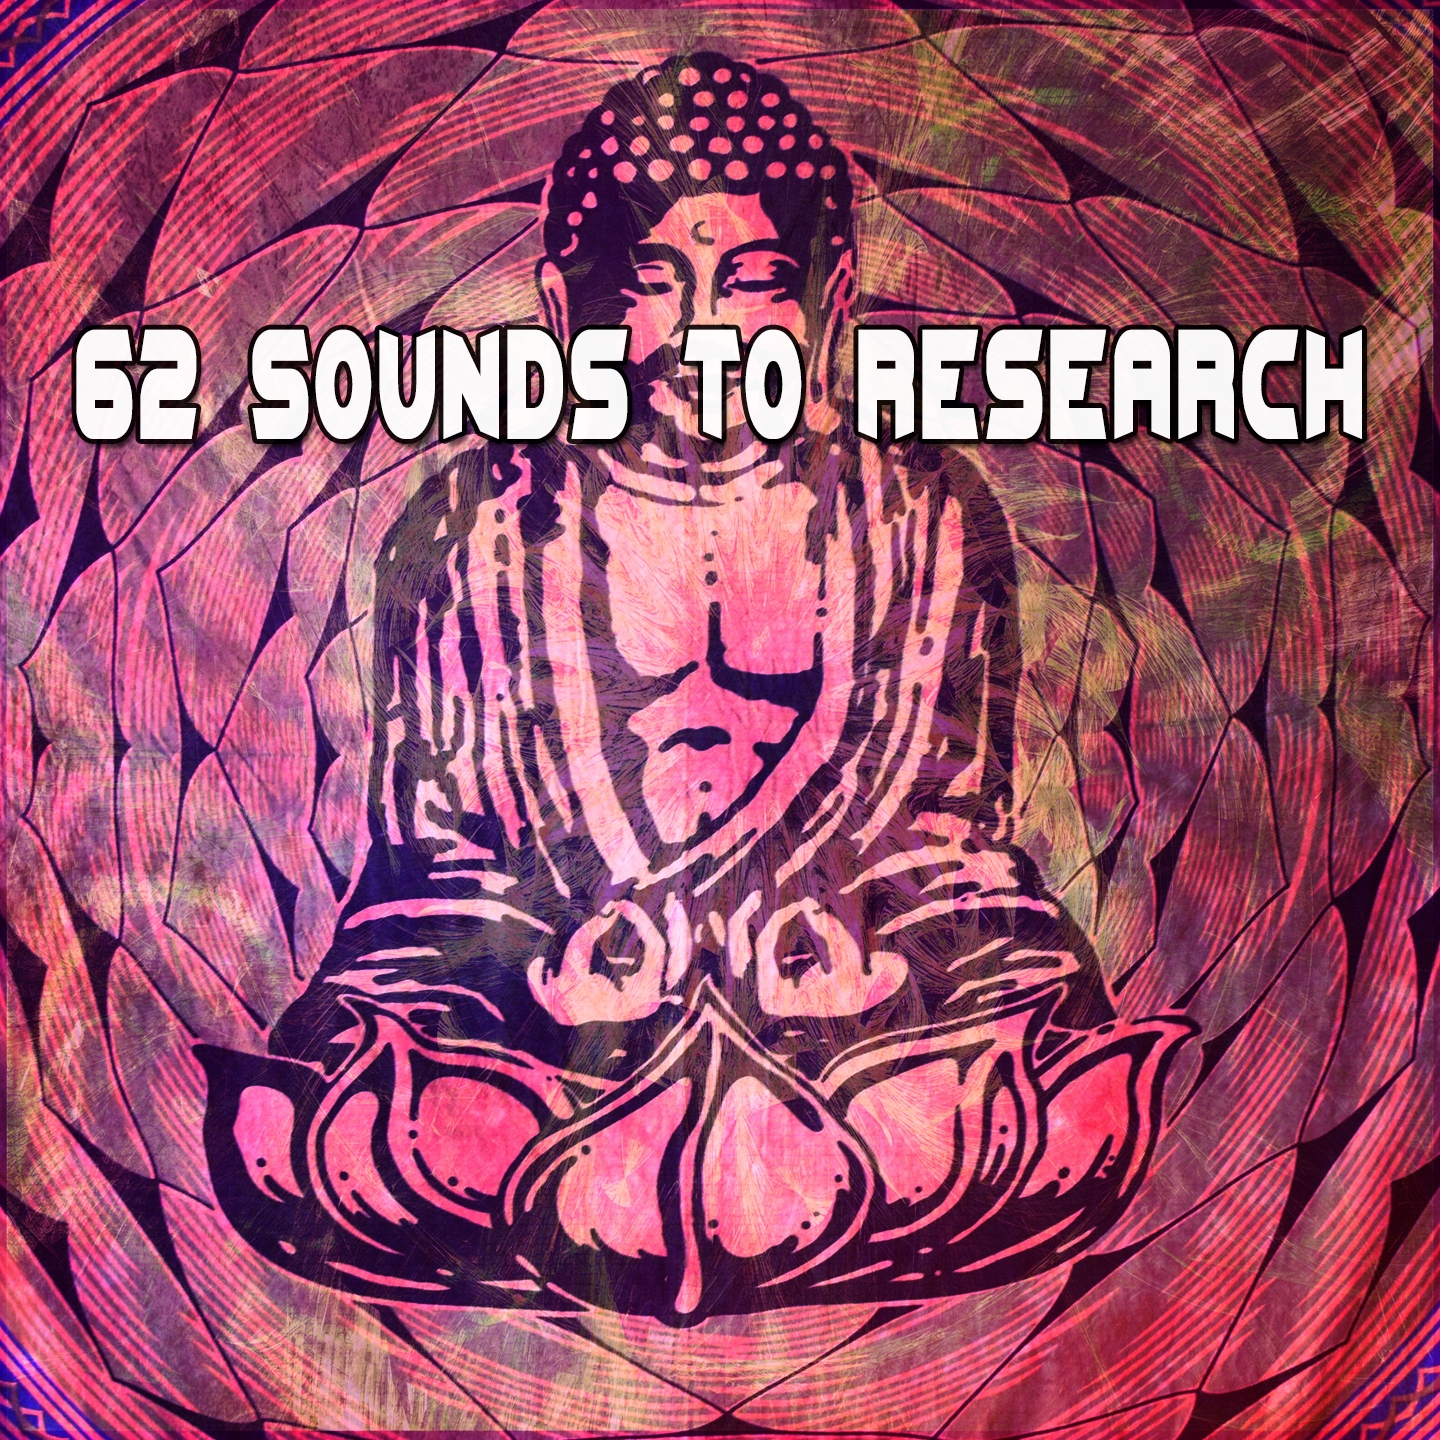 62 Sounds To Research